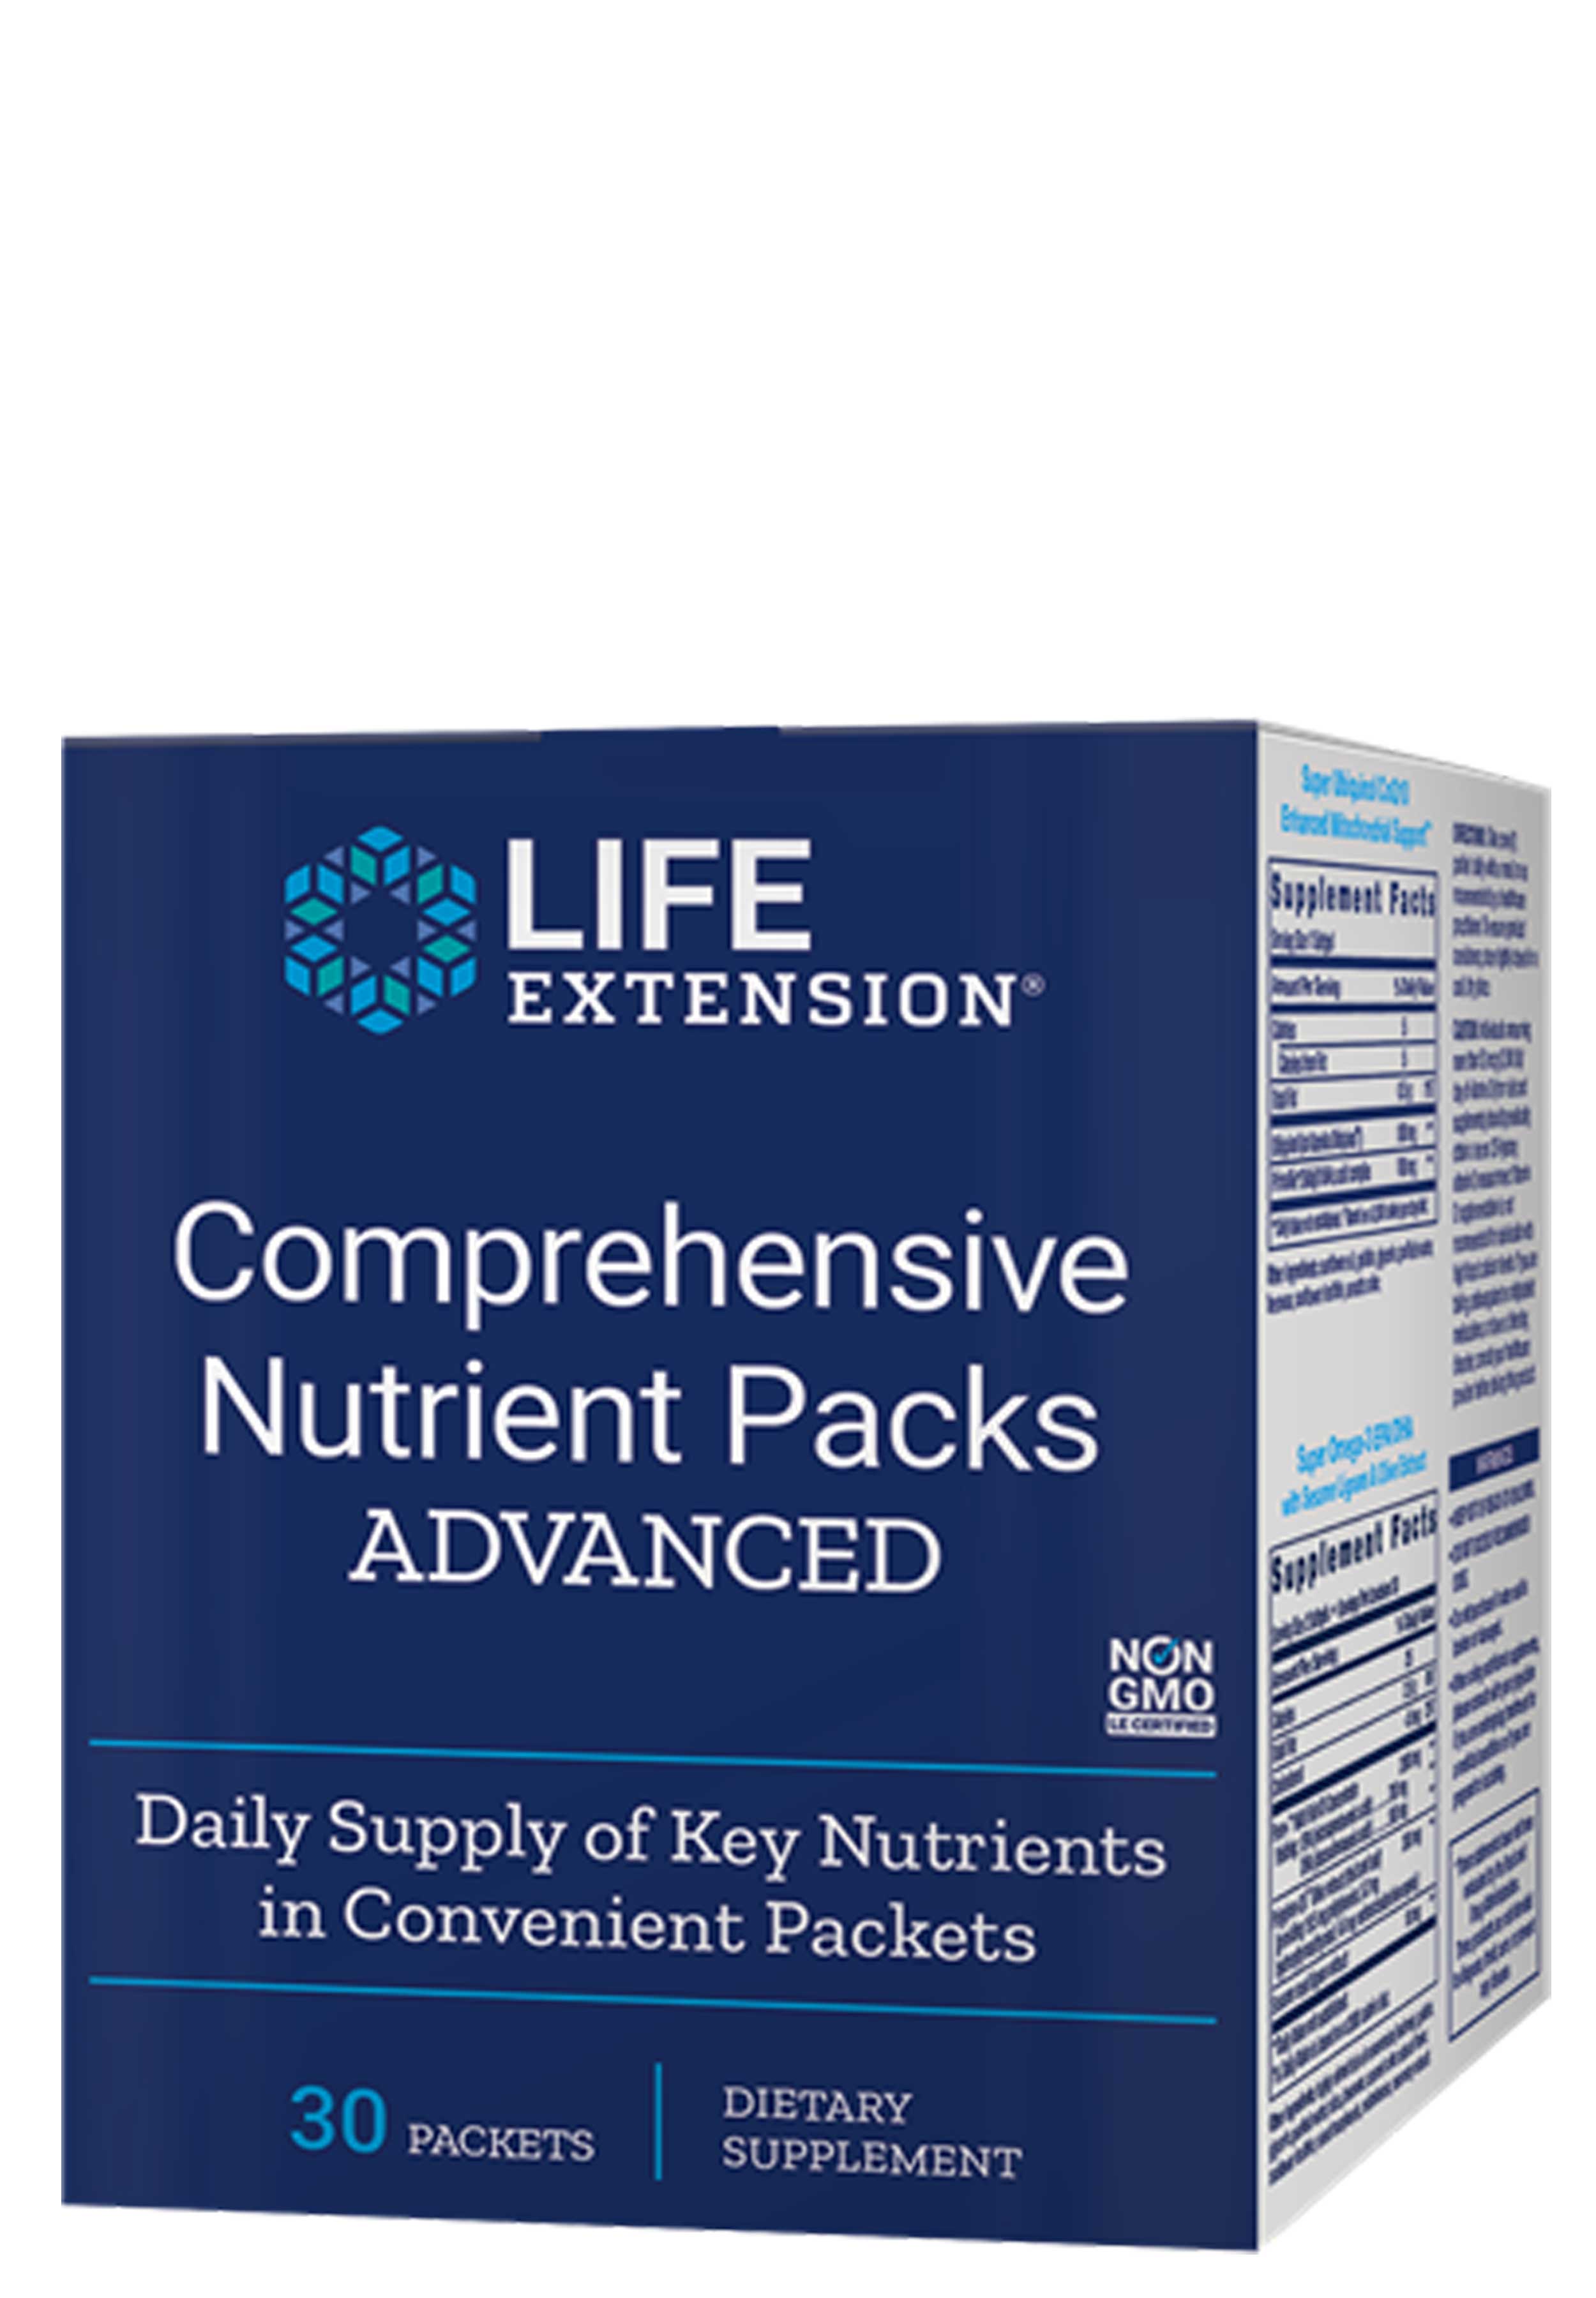 Life Extension Comprehensive Nutrient Packs ADVANCED